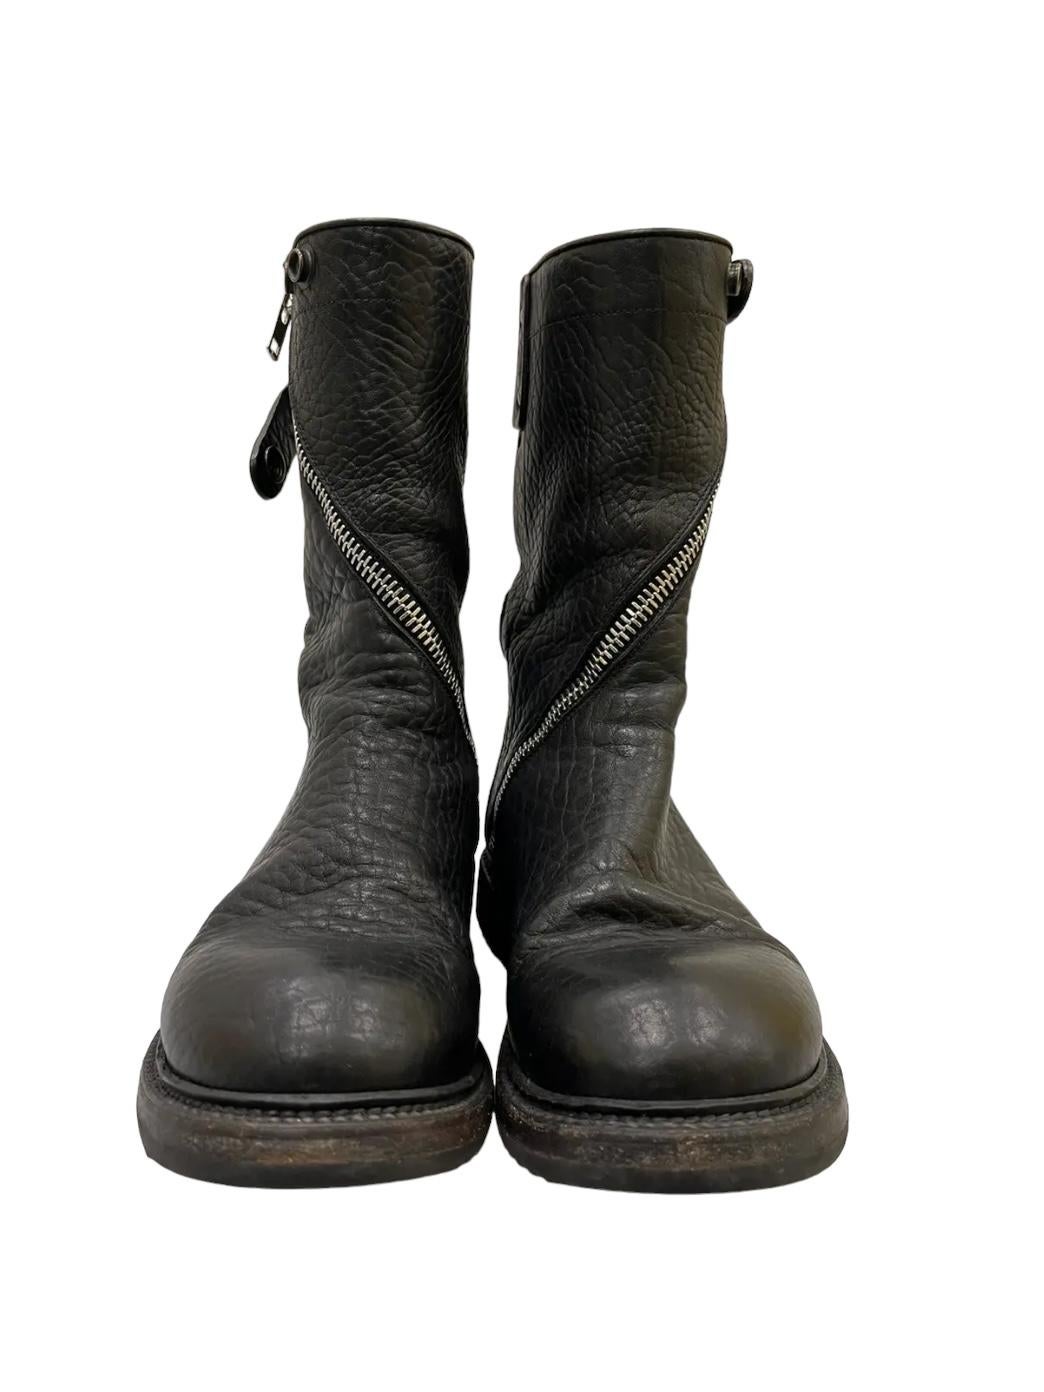 Rick Owens FW 11 Limo Spiral Leather Zip Boots For Sale 1